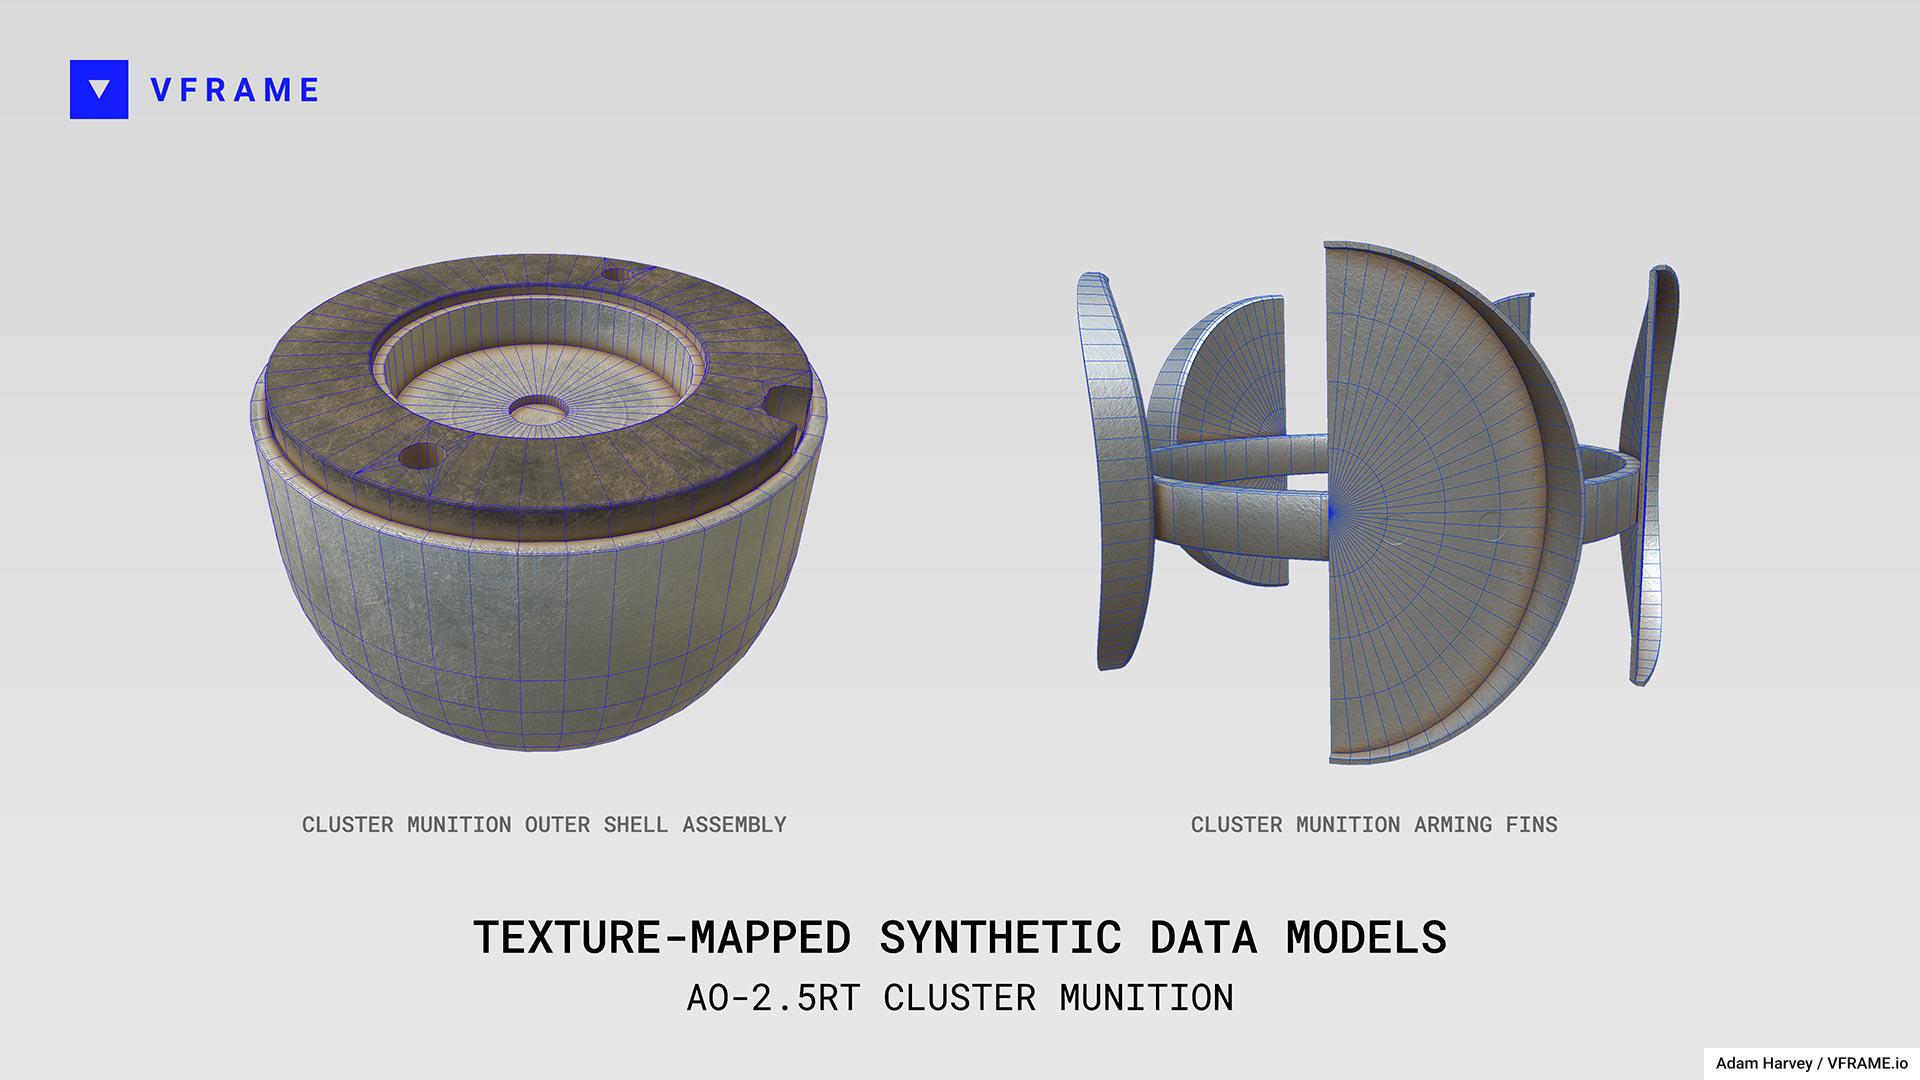 Texture-mapped 3D models of the AO-2.5RT cluster munition: shell assembly (left) and arming fins (right).